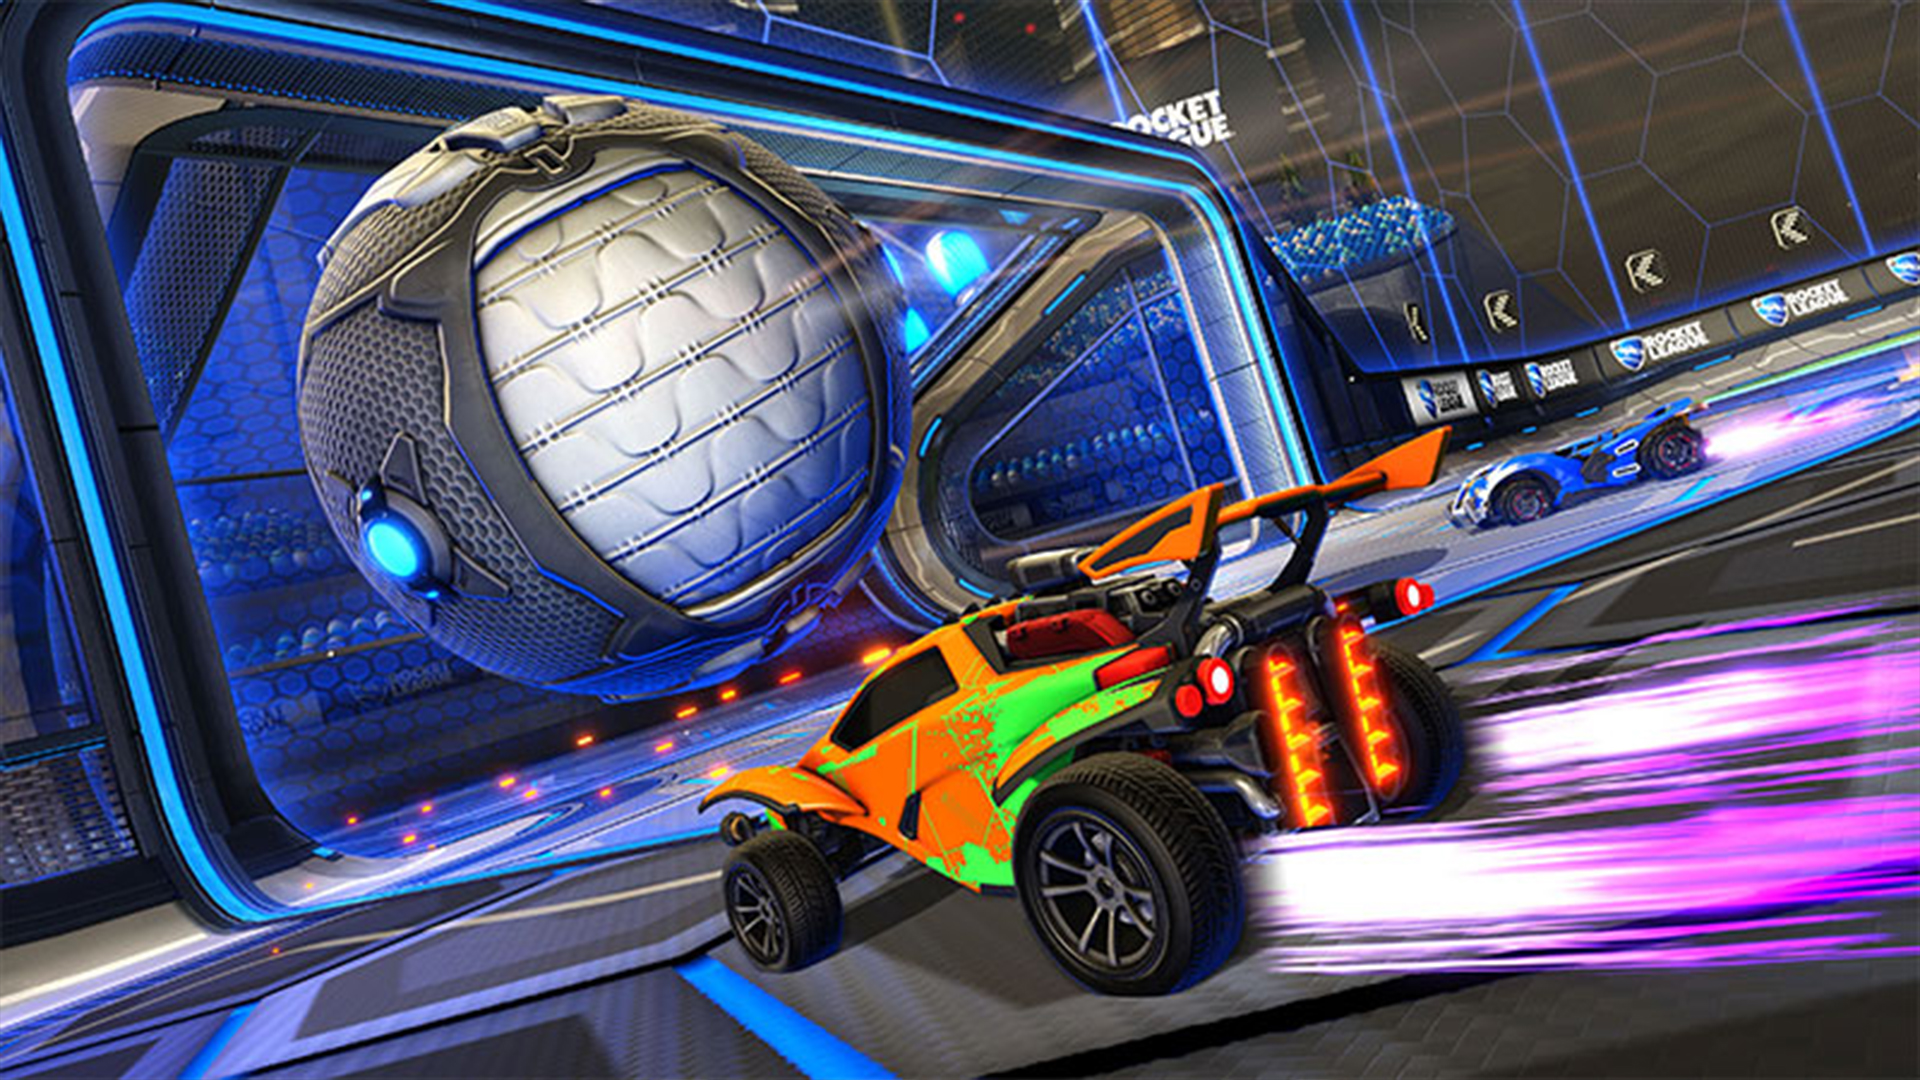 Epic won’t say if Rocket League will remain available on Steam PCGamesN